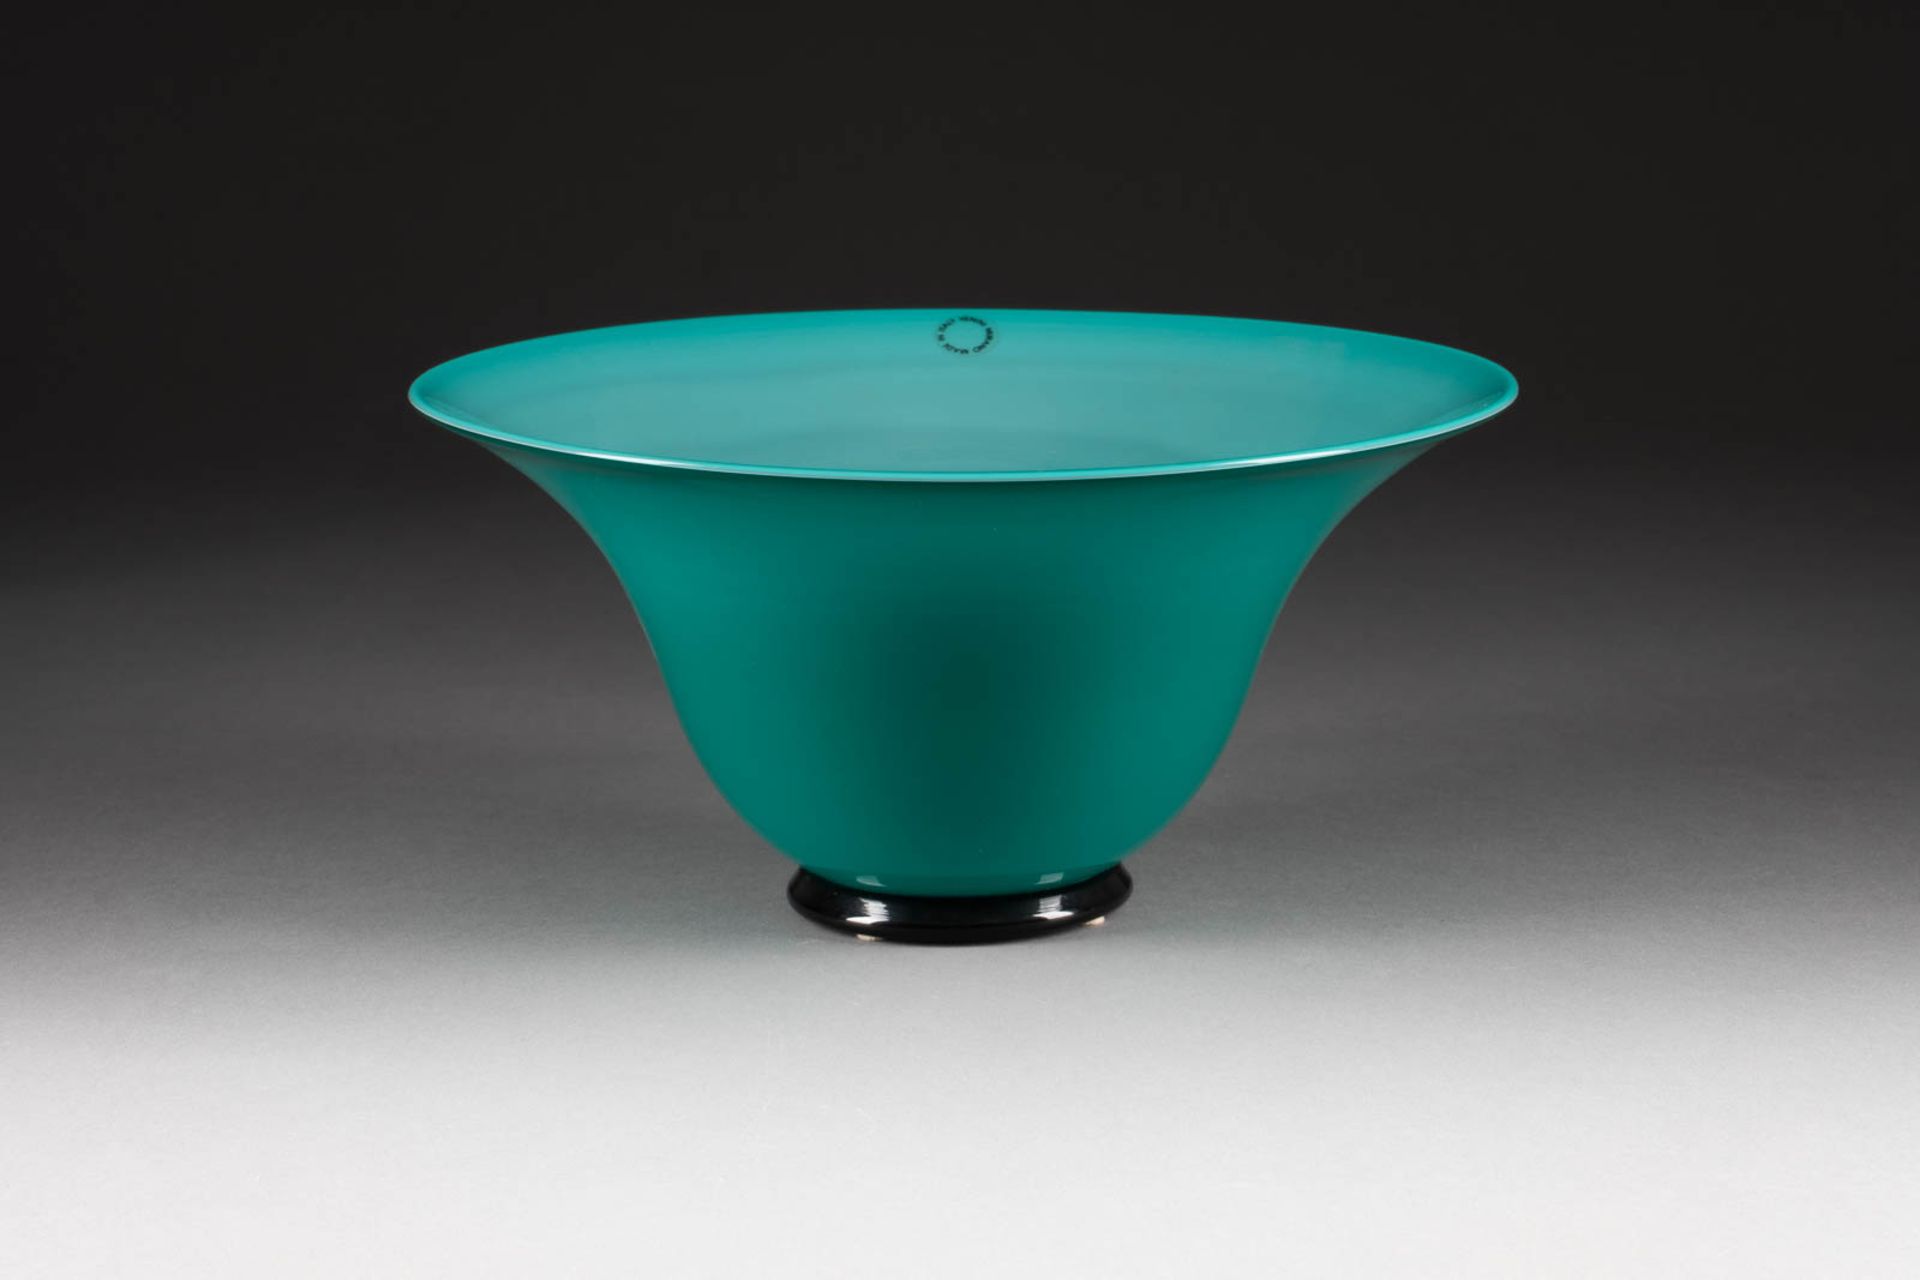 BOWL 'ANNI TRENTA'Italy, Venini & C., Murano, 1988 Transparent turquoise and green glass and a black